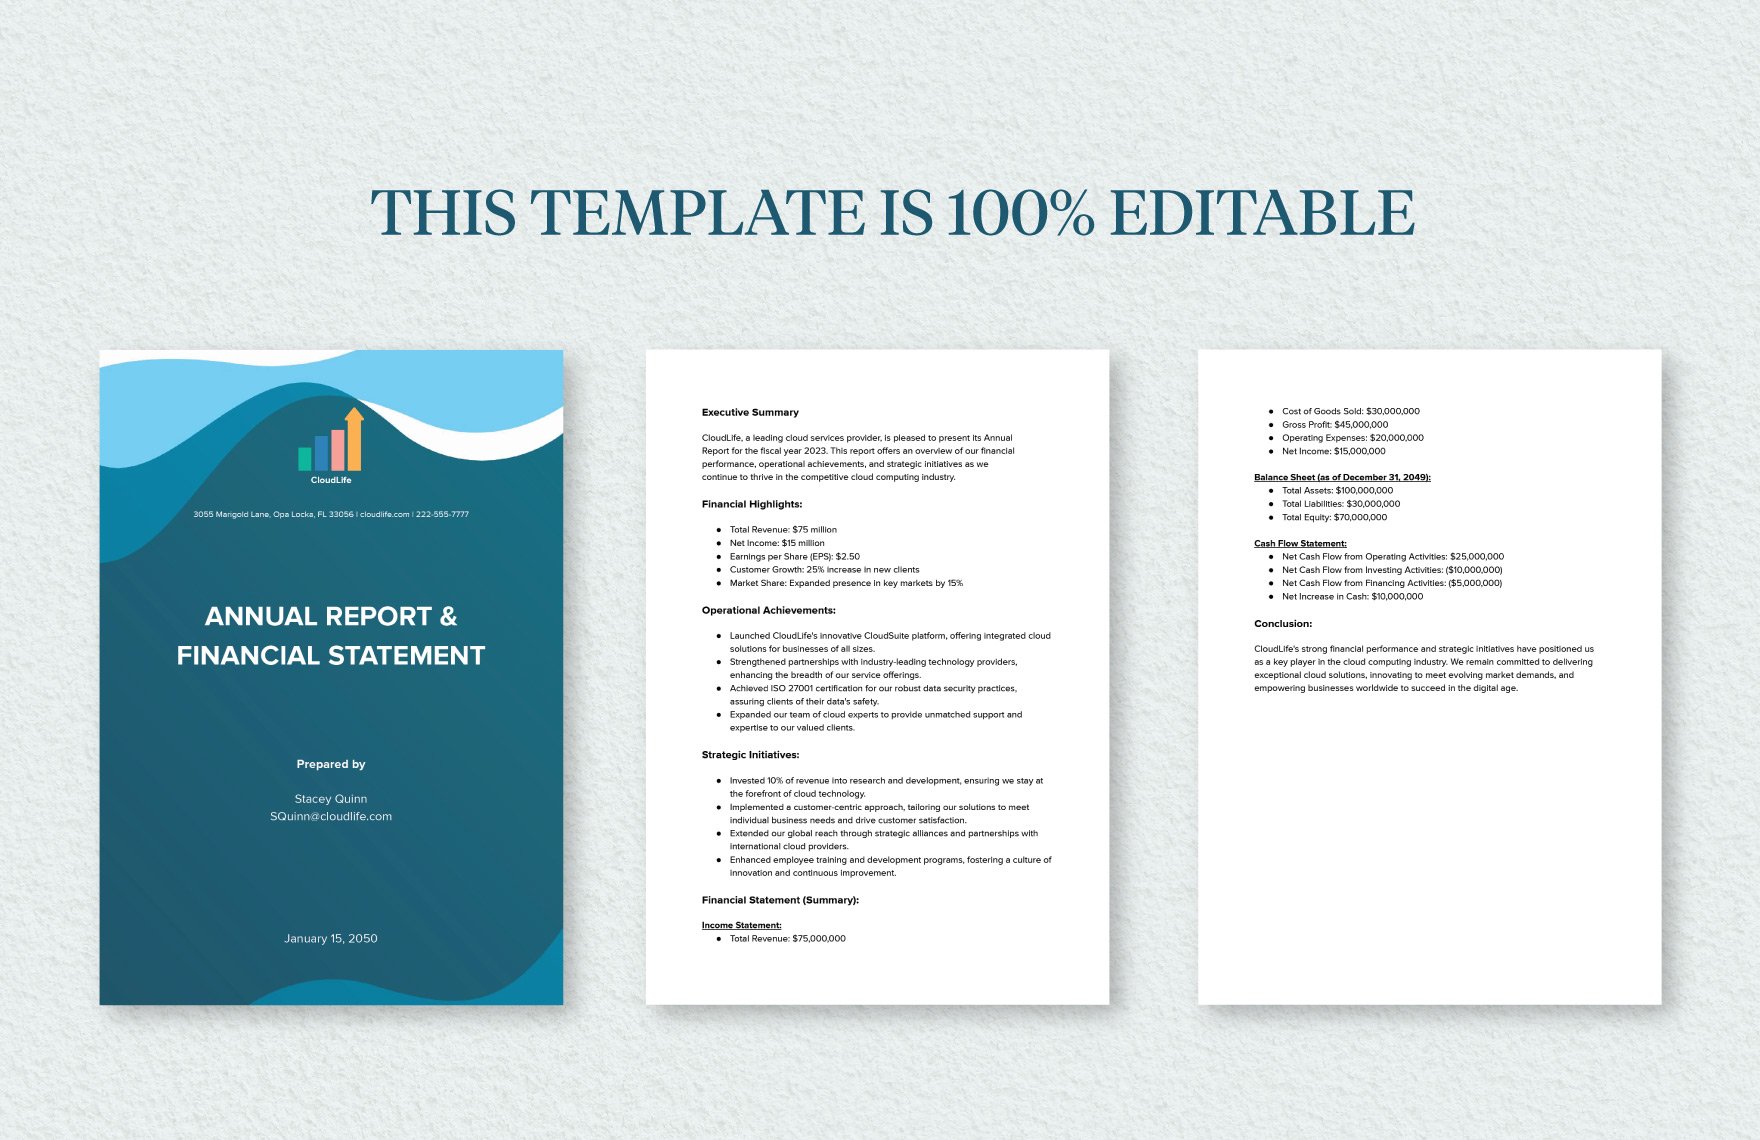 Annual Report & Financial Statement Template